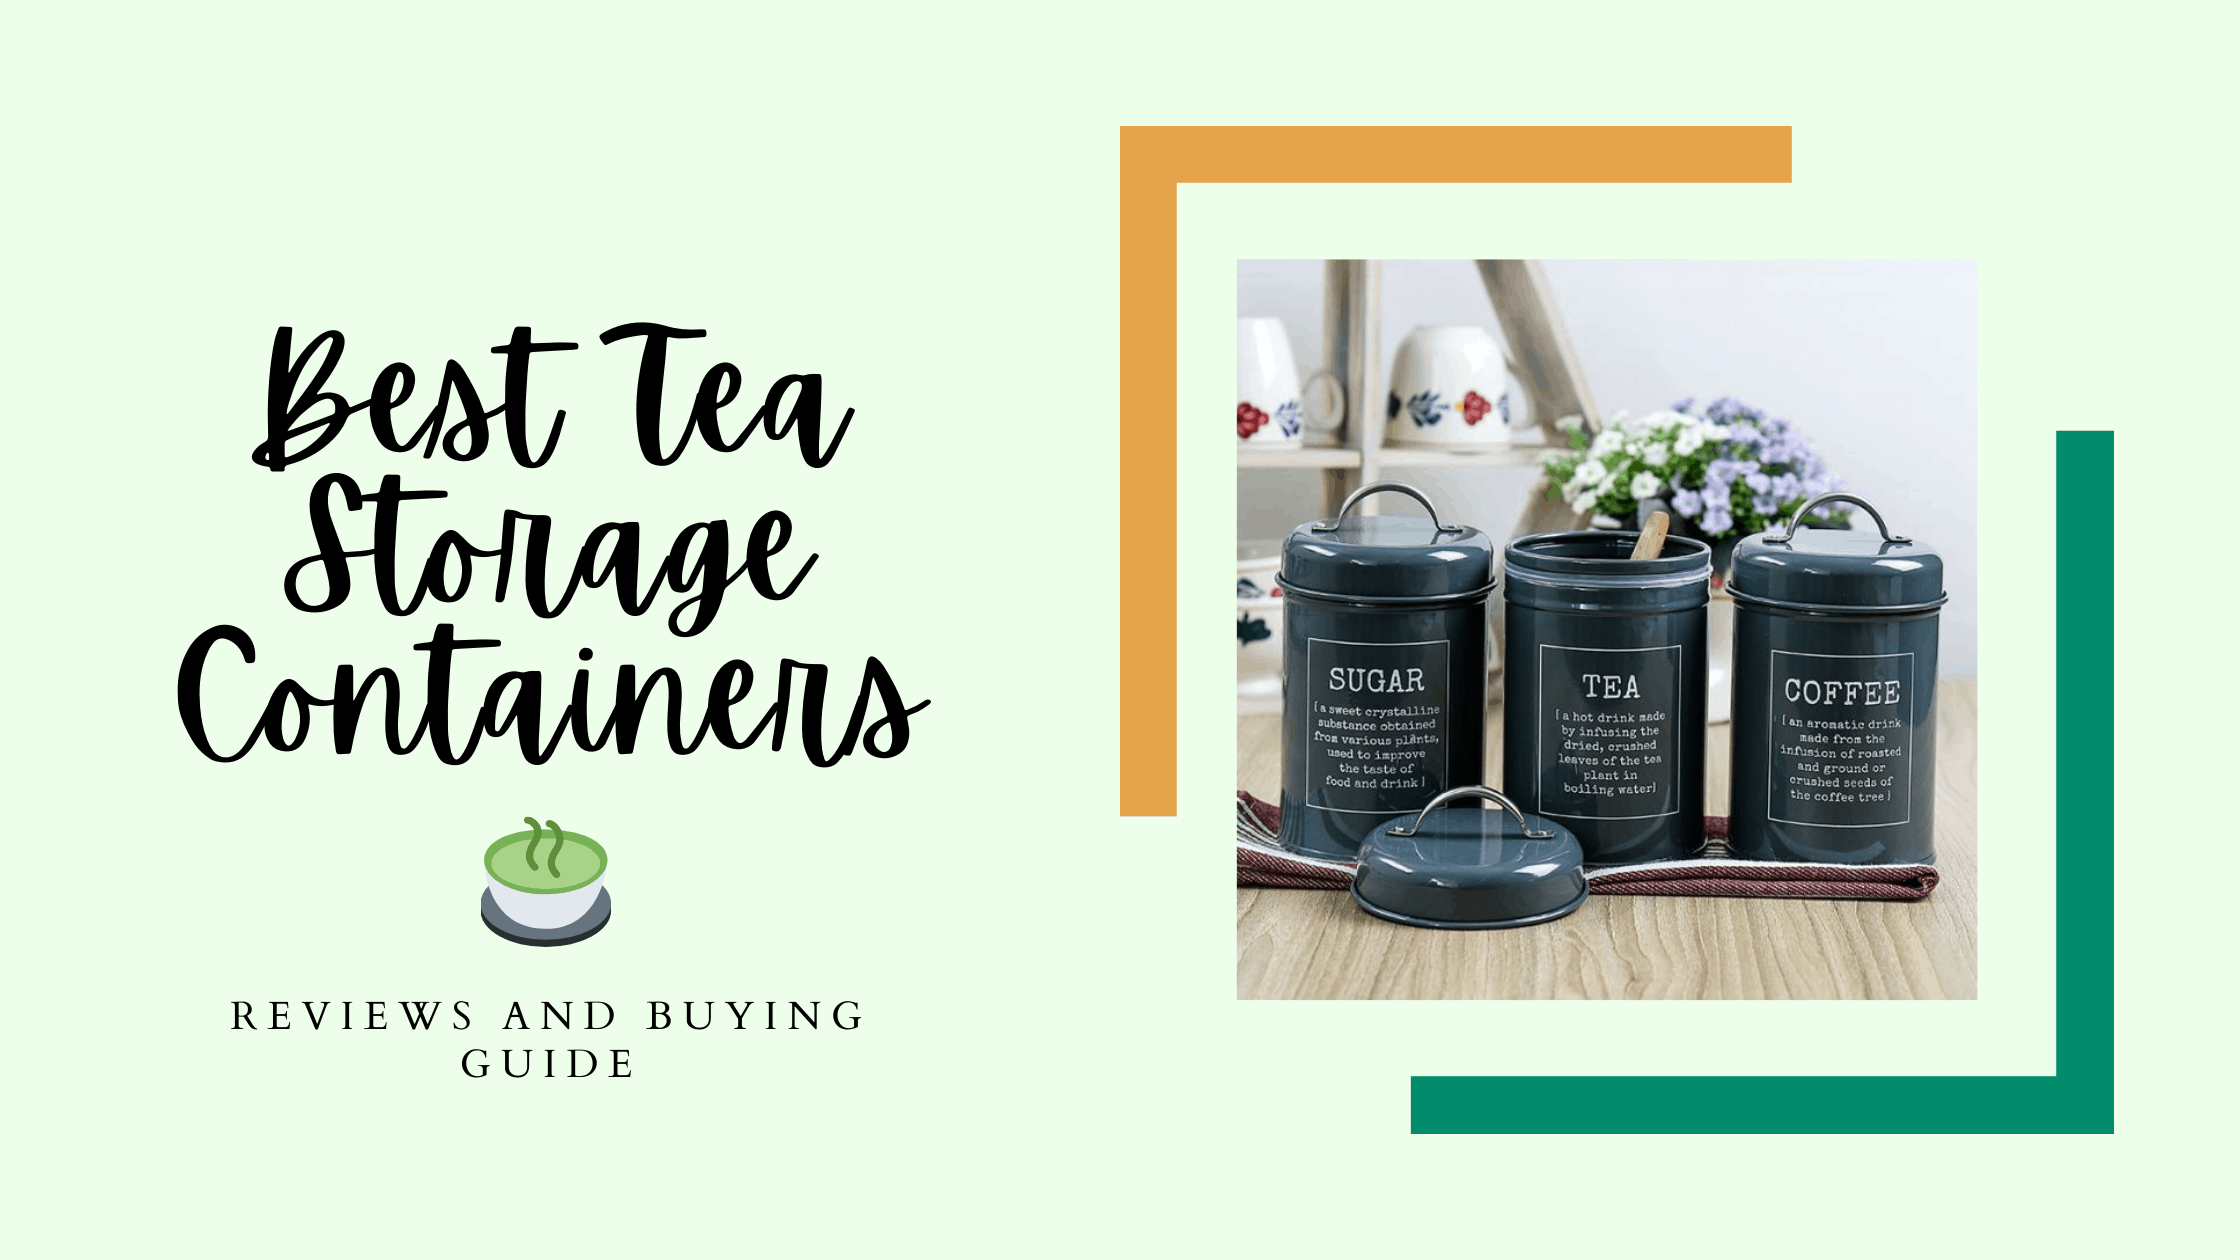 Best Tea Storage Containers